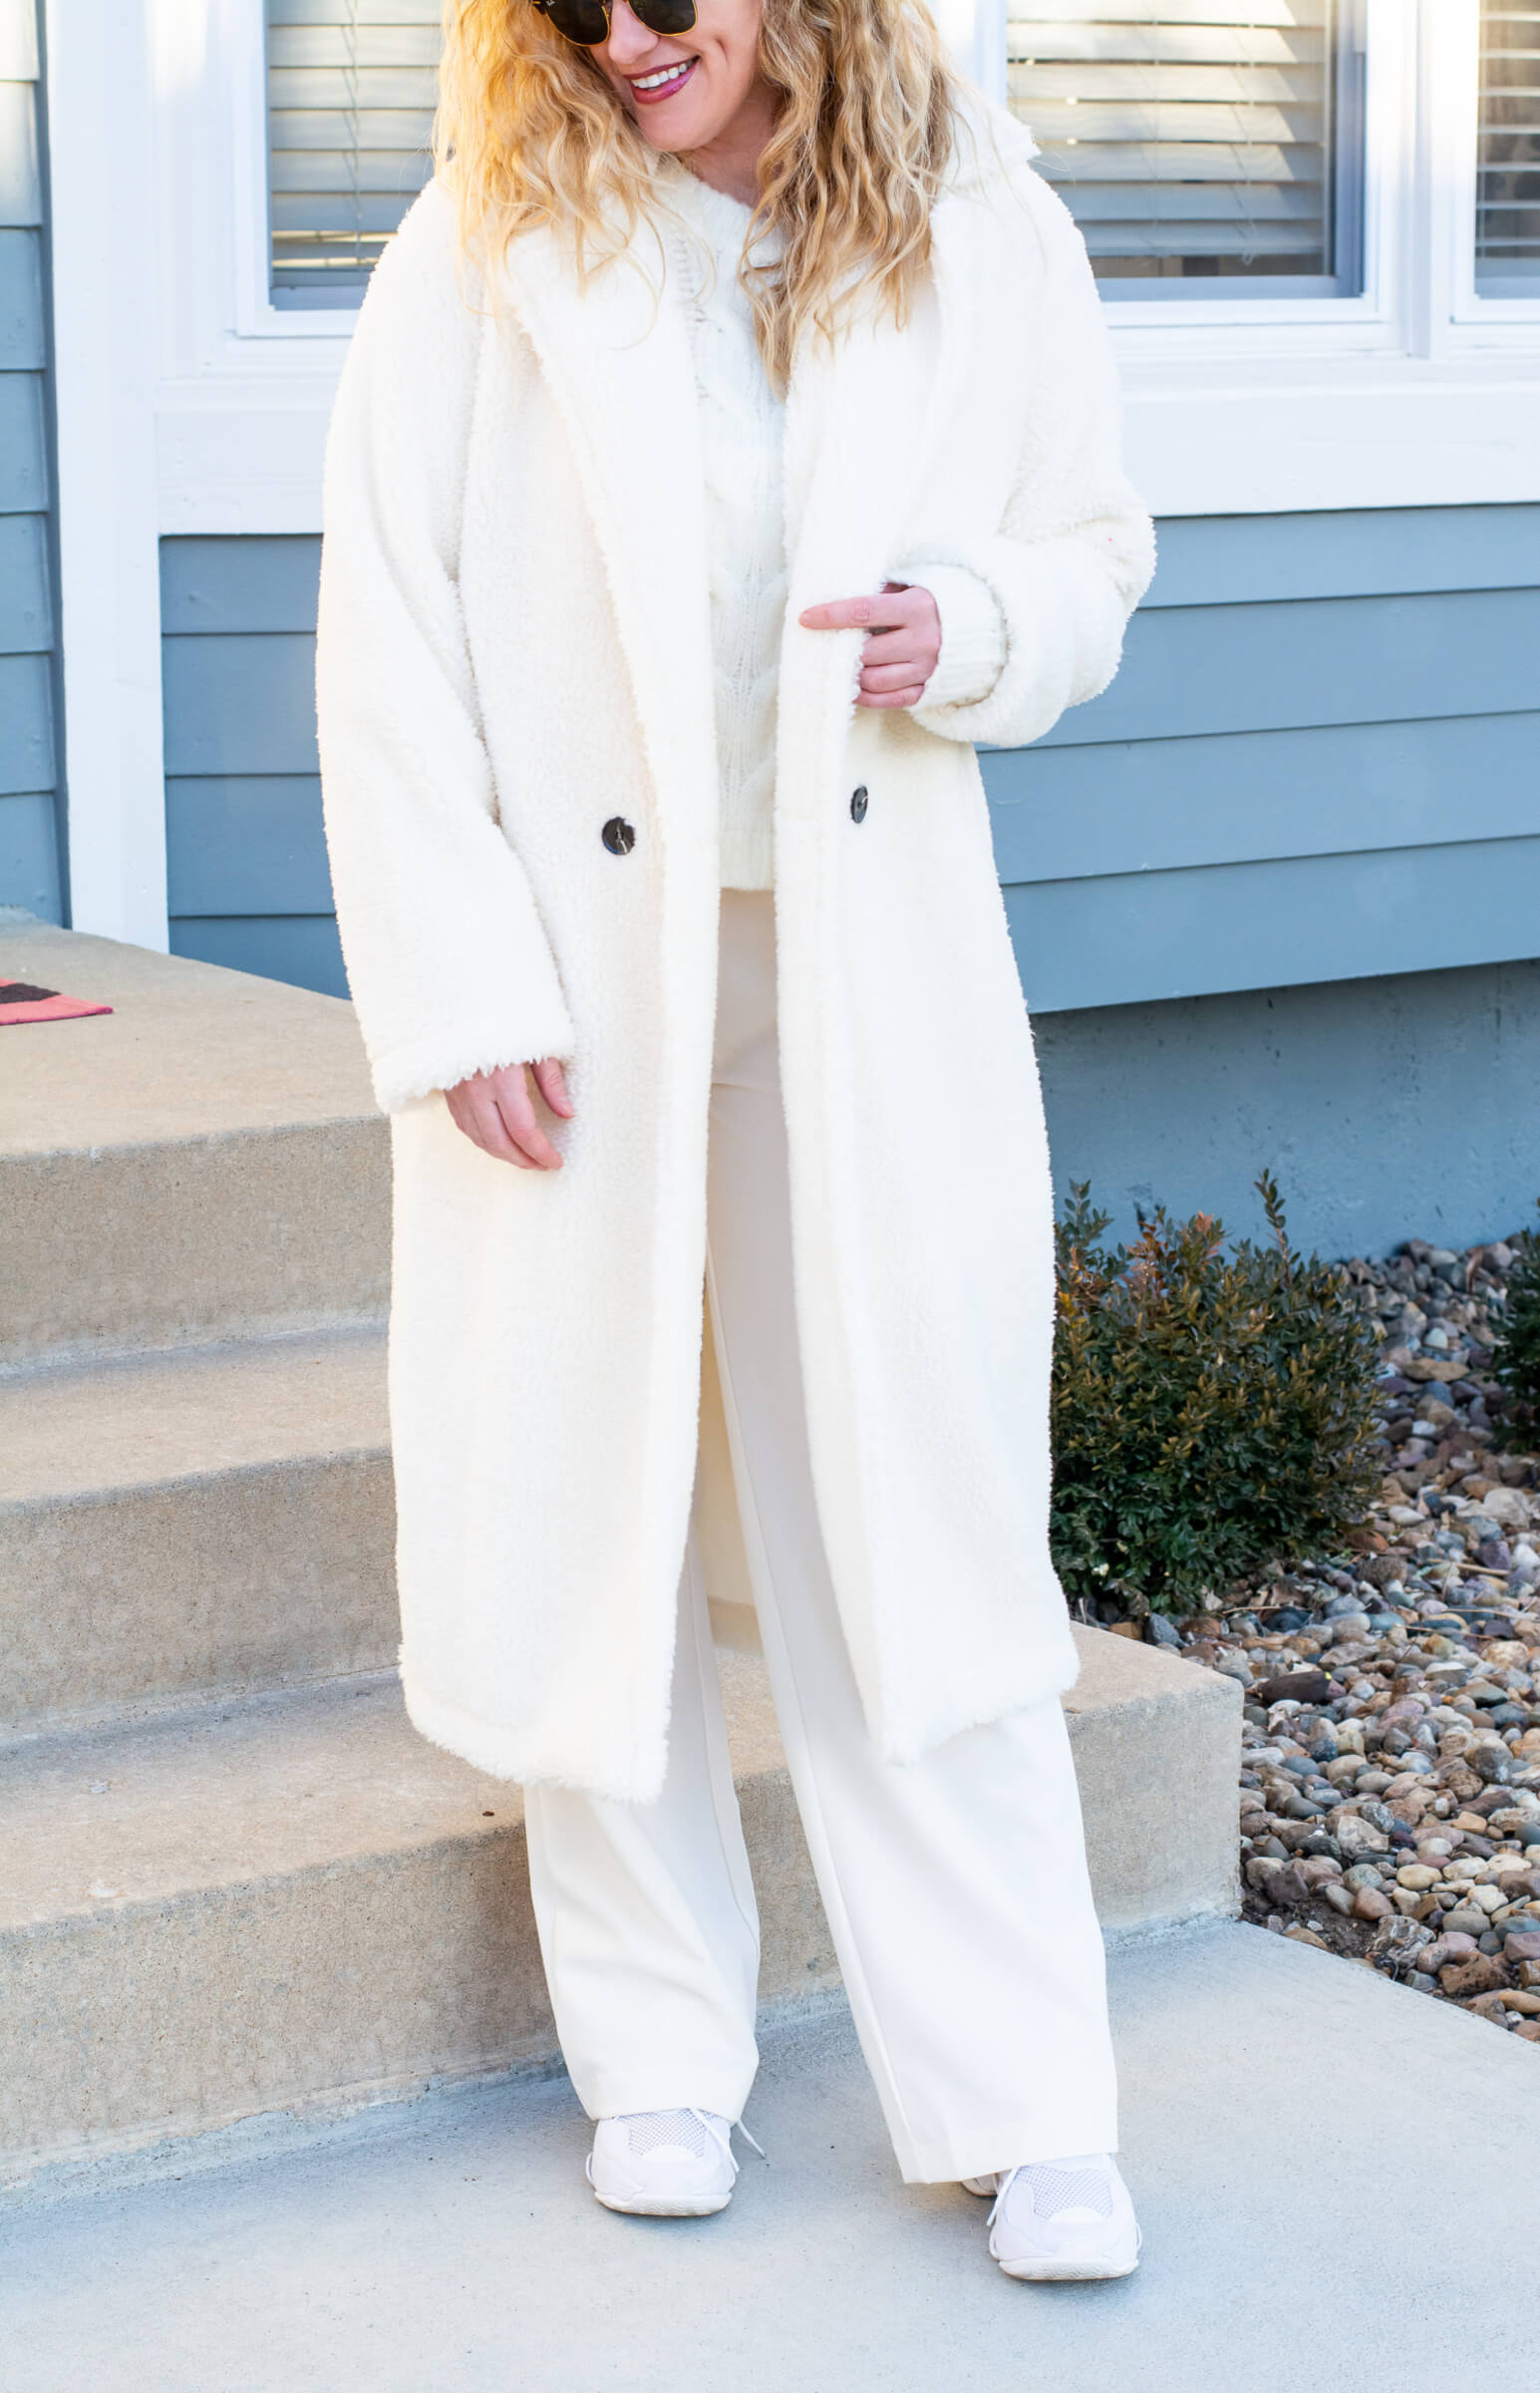 Winter White Outfit: Teddy Coat, Trousers, and Sneakers. | LSR